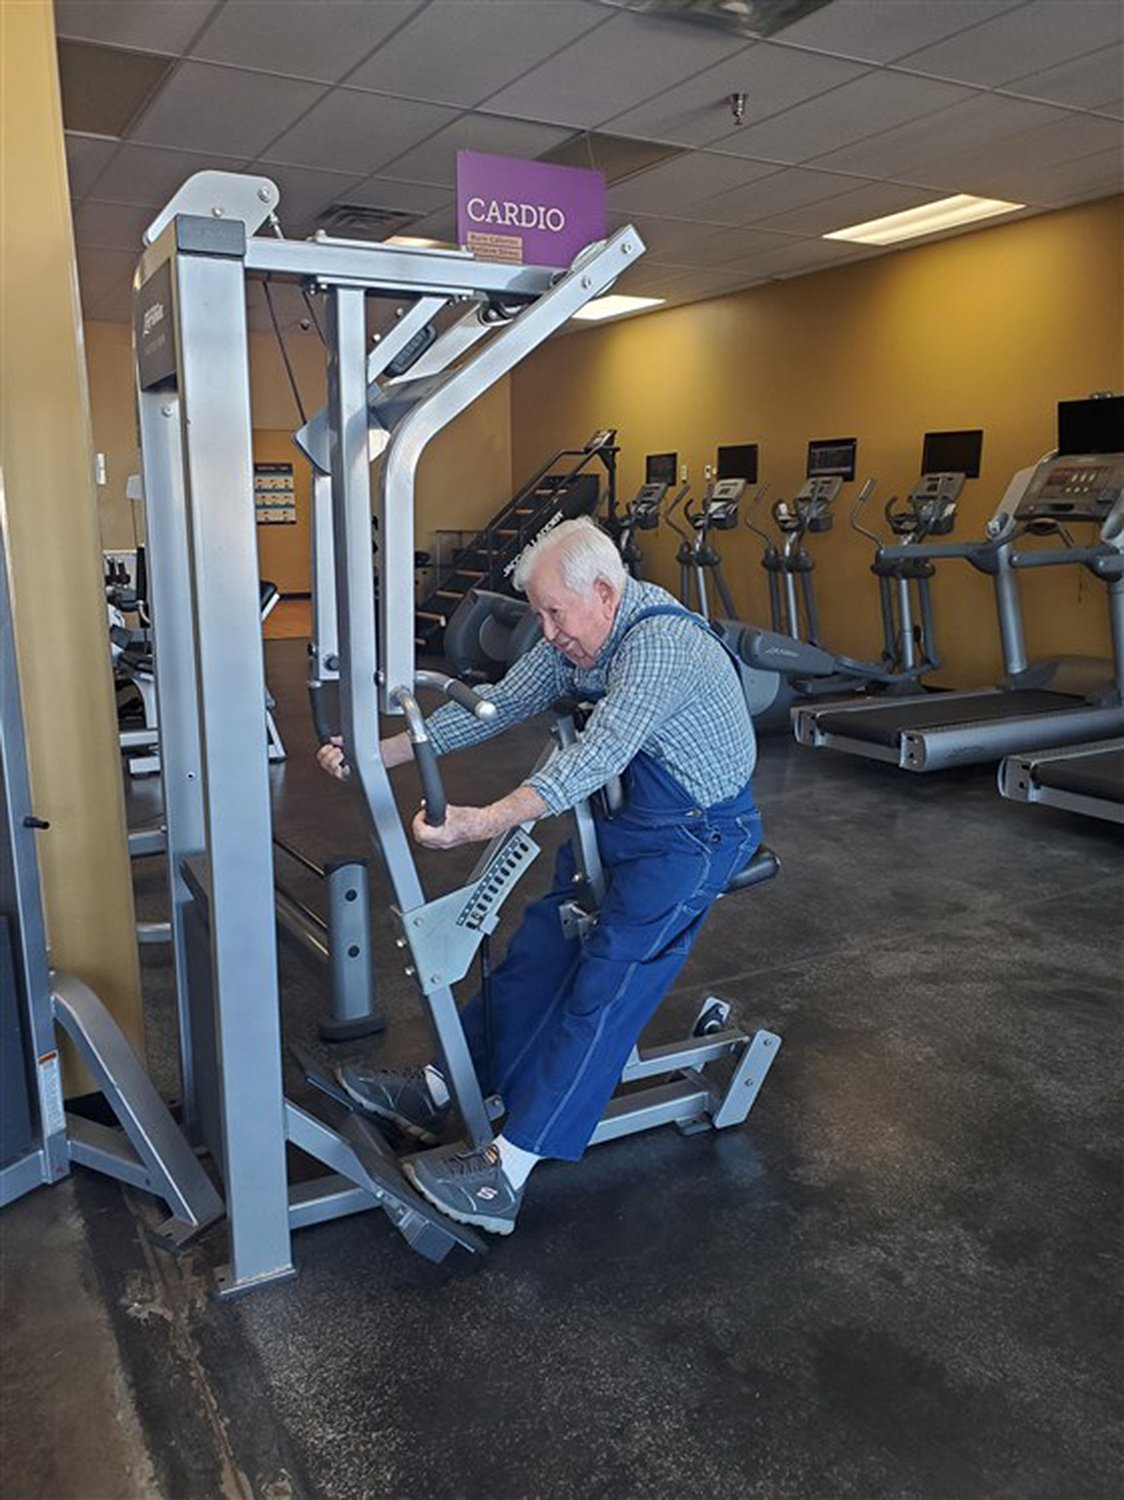 lloyd black works out at a gym in his overalls at 91 years old 